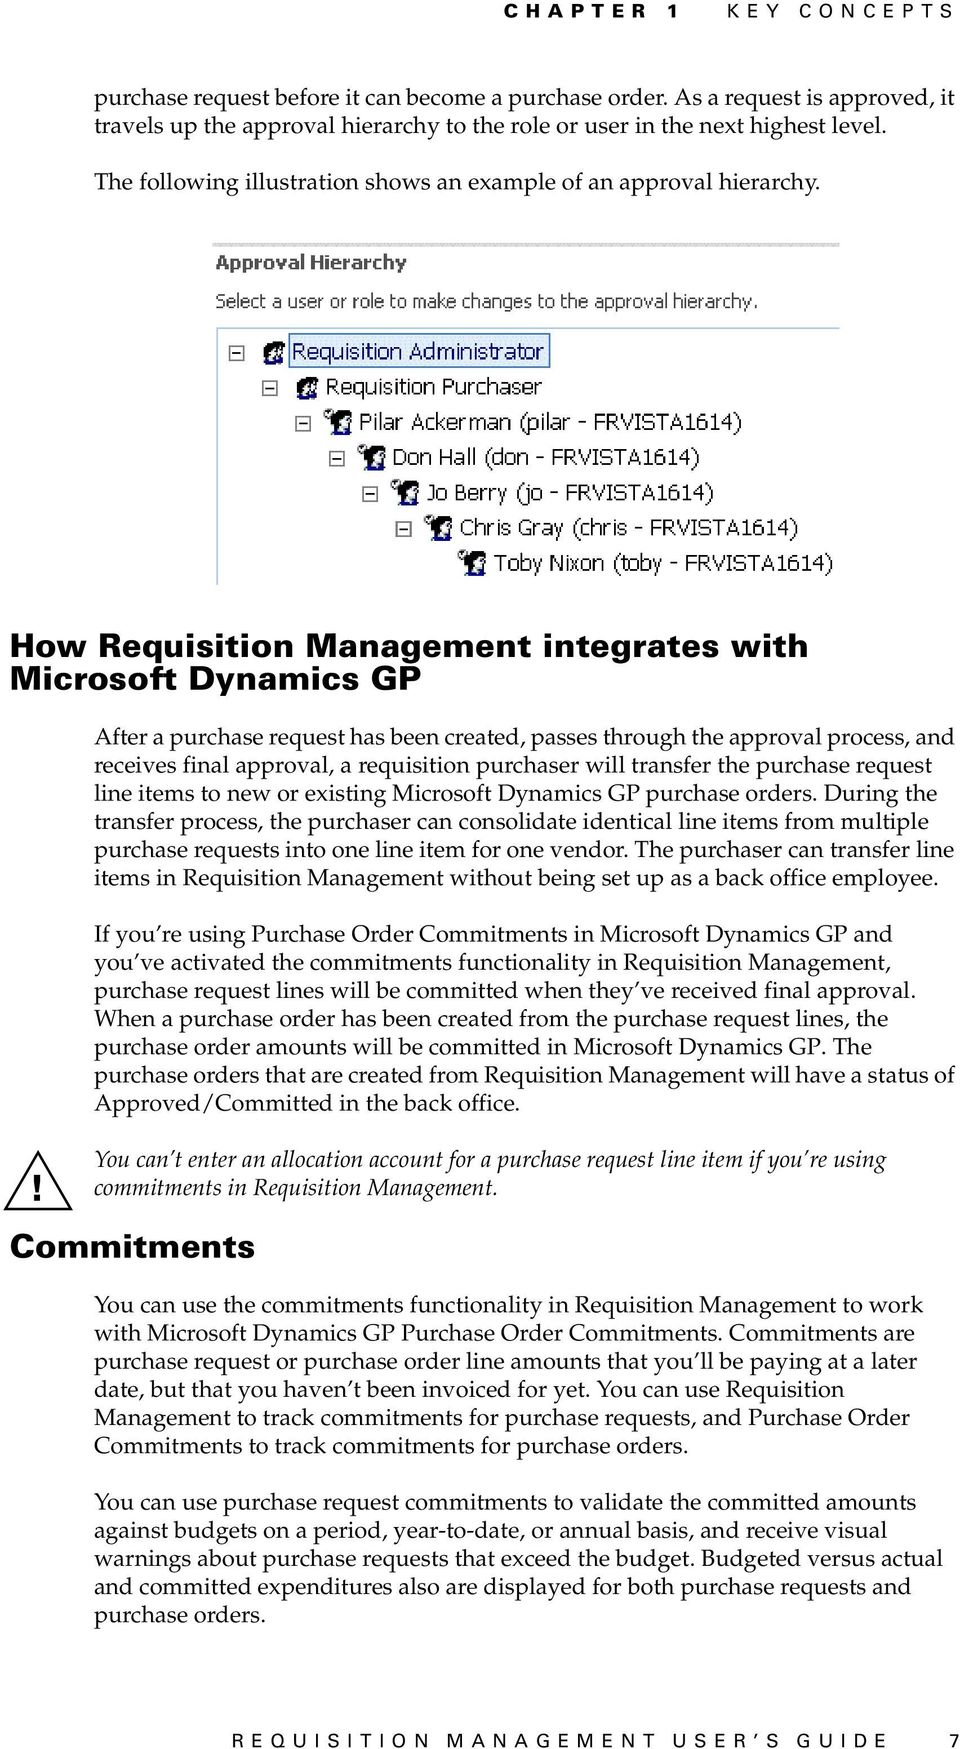 How Requisition Management integrates with Microsoft Dynamics GP After a purchase request has been created, passes through the approval process, and receives final approval, a requisition purchaser